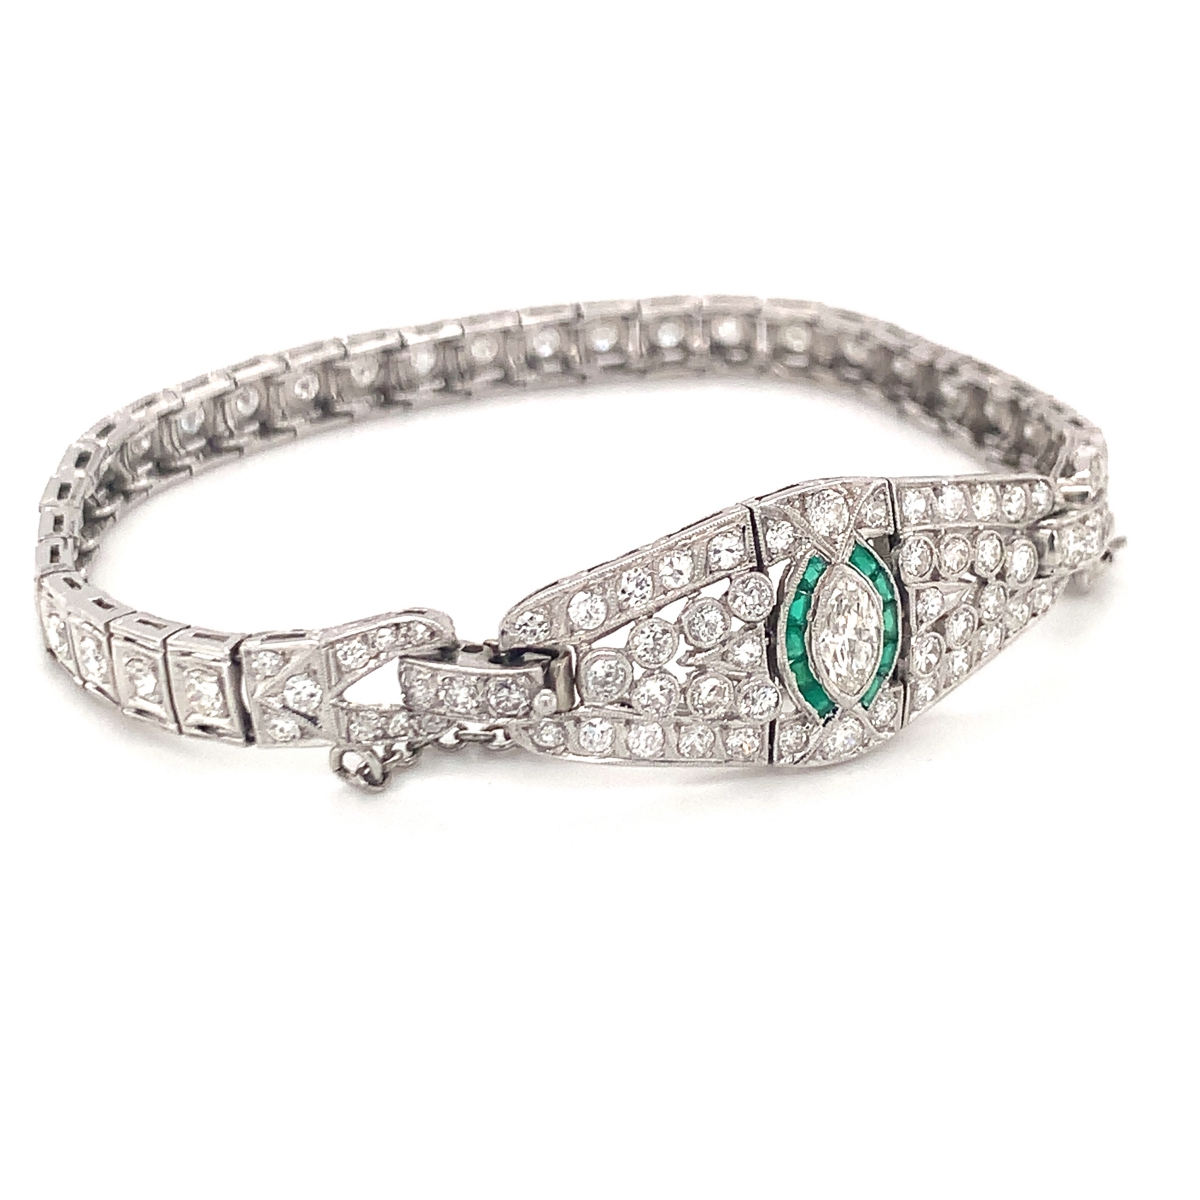 Vintage Inspired Diamond Bracelet 001-170-00236 Cary | Joint Venture Jewelry  | Cary, NC